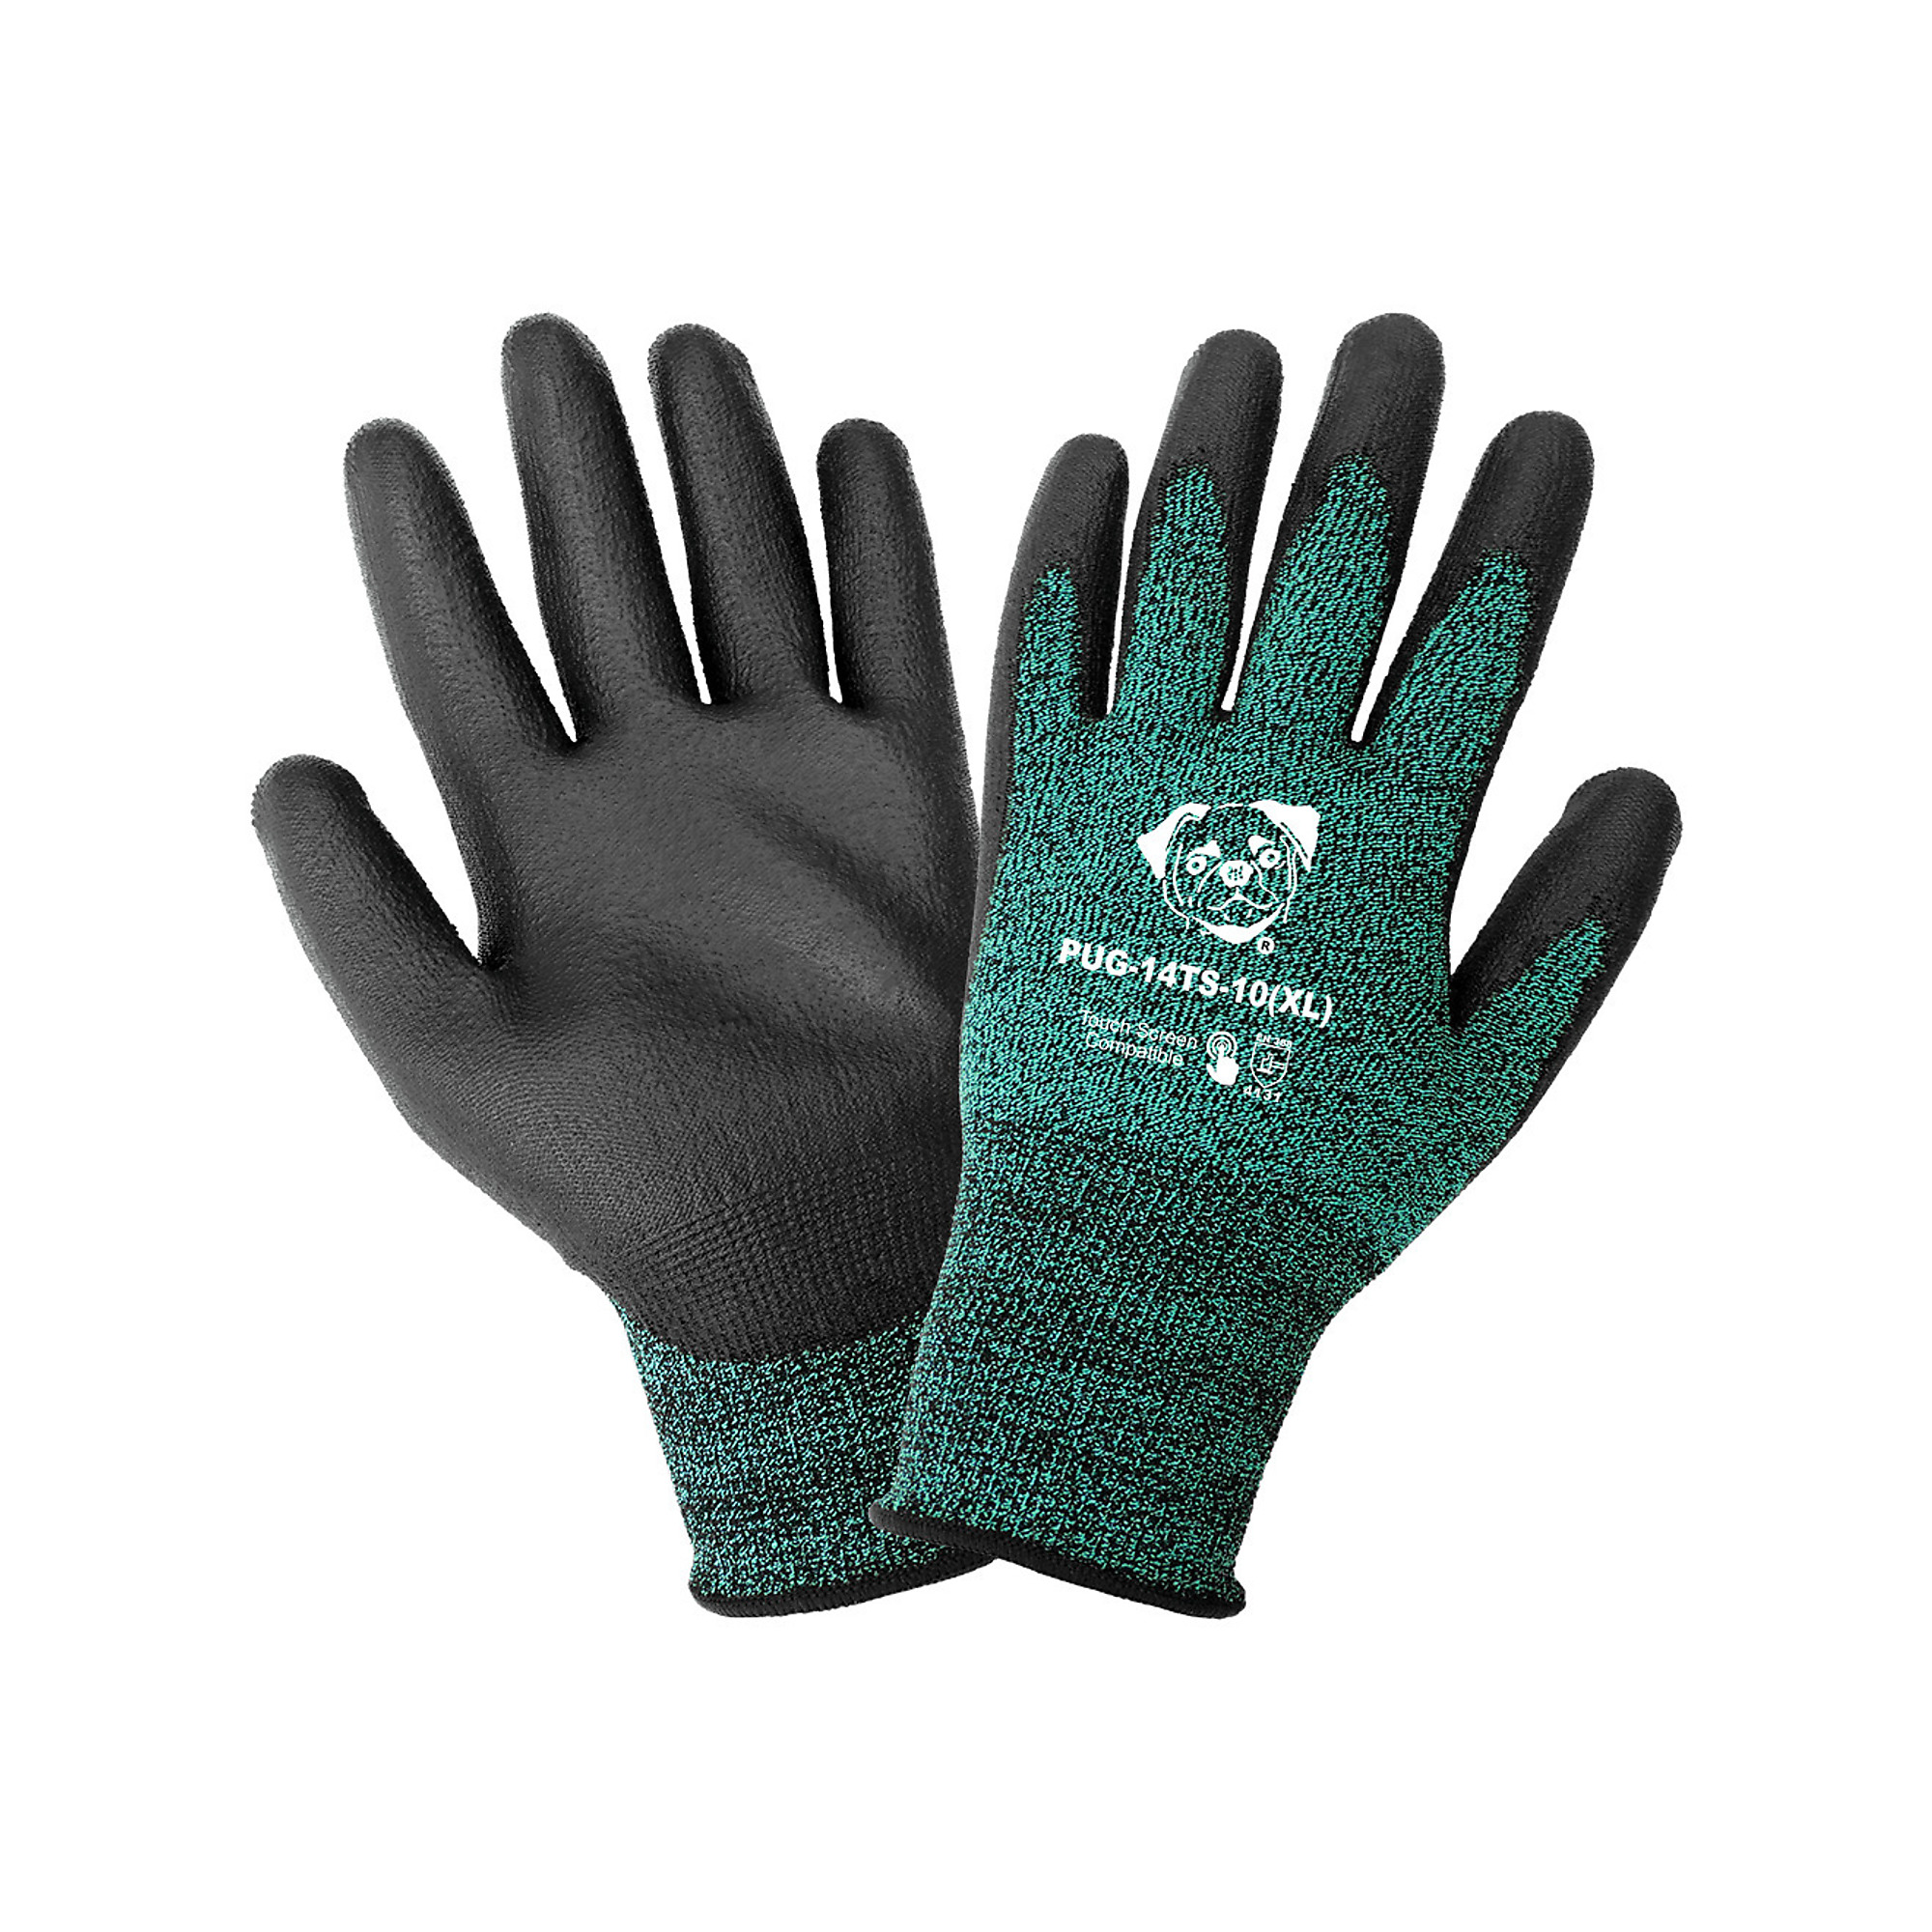 Global Glove PUG , Green, Poly Coated, Cut Resis A1 Tch Scrn Gloves - 12 Pairs, Size S, Color Green/Black, Included (qty.) 12 Model PUG-14TS-7(S)